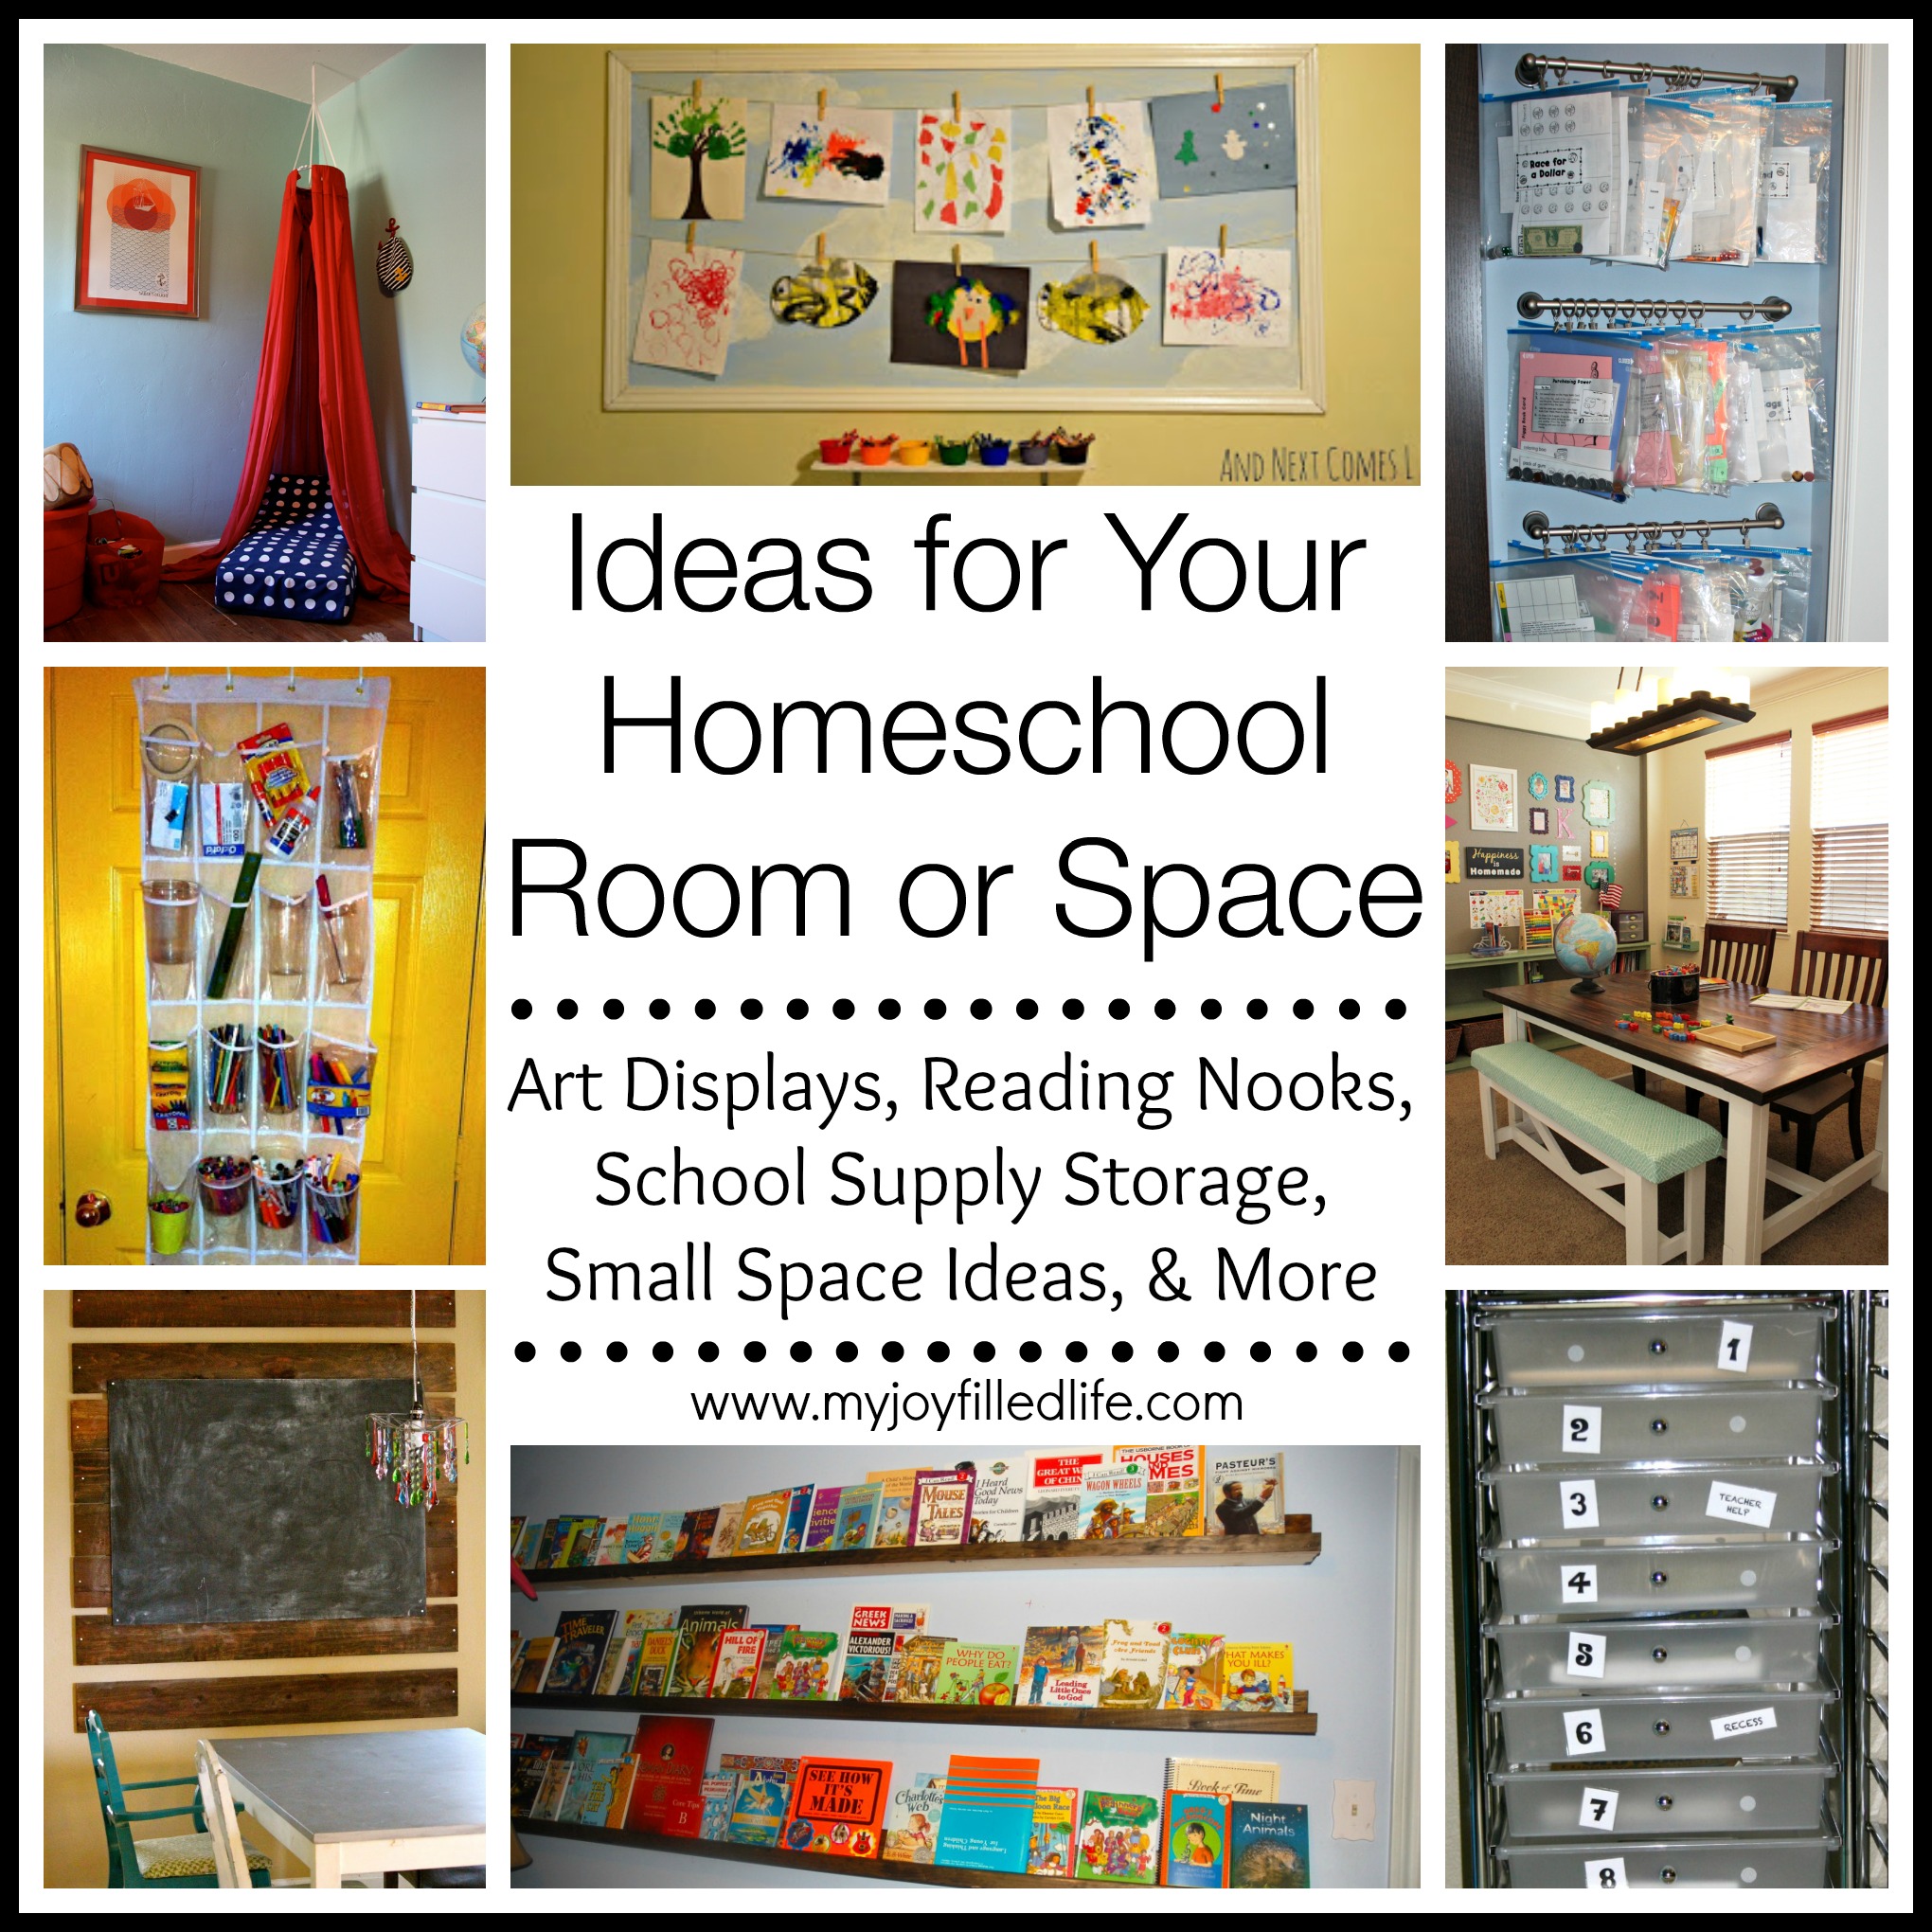 ideas-for-your-homeschool-room-or-space-my-joy-filled-life